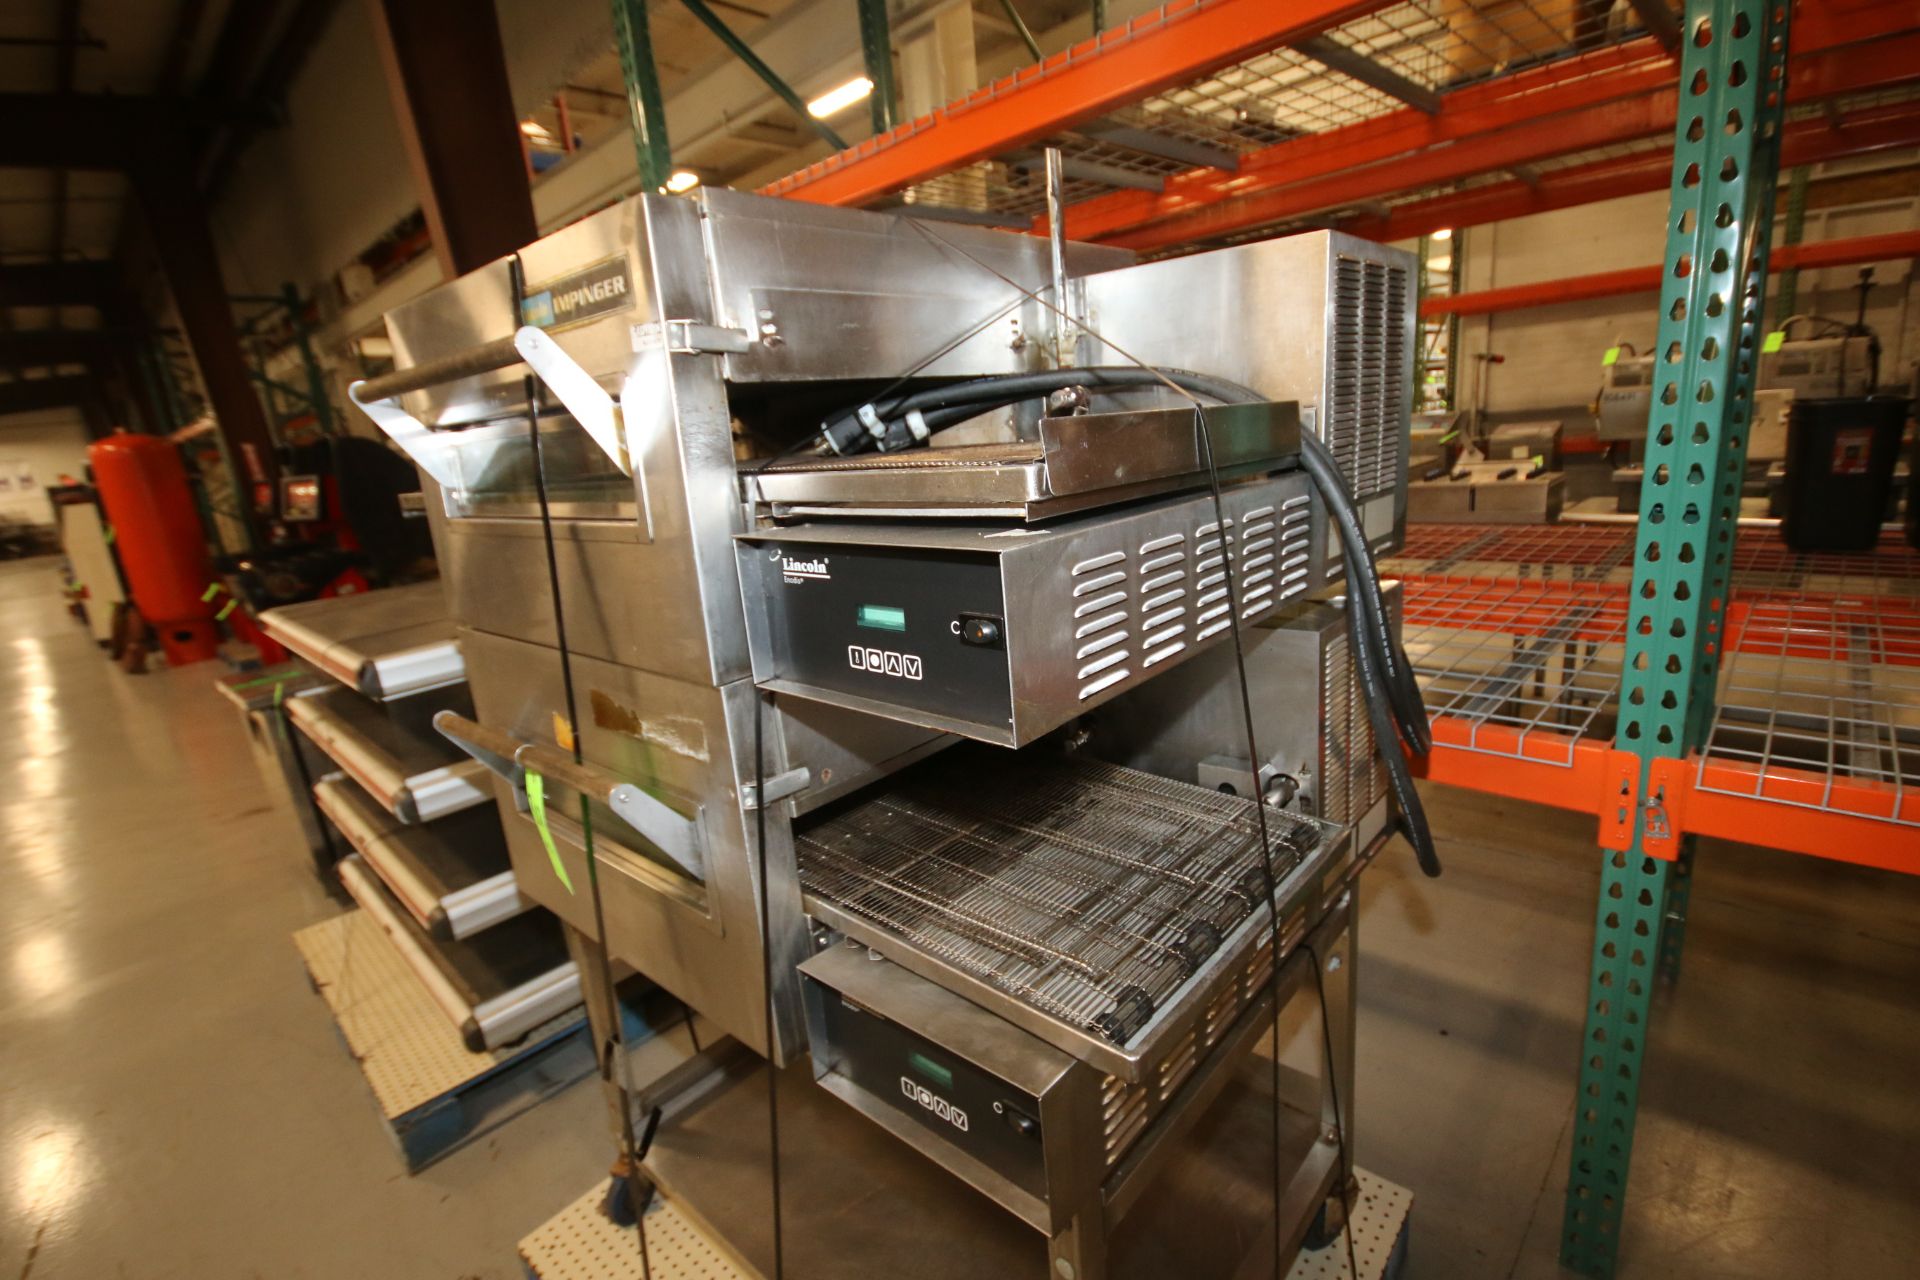 Lincoln Impinger Double Stack Conveyor Pizza Oven with Aprox. 53" L x 18" W x 3-1/4" W Product - Image 2 of 3